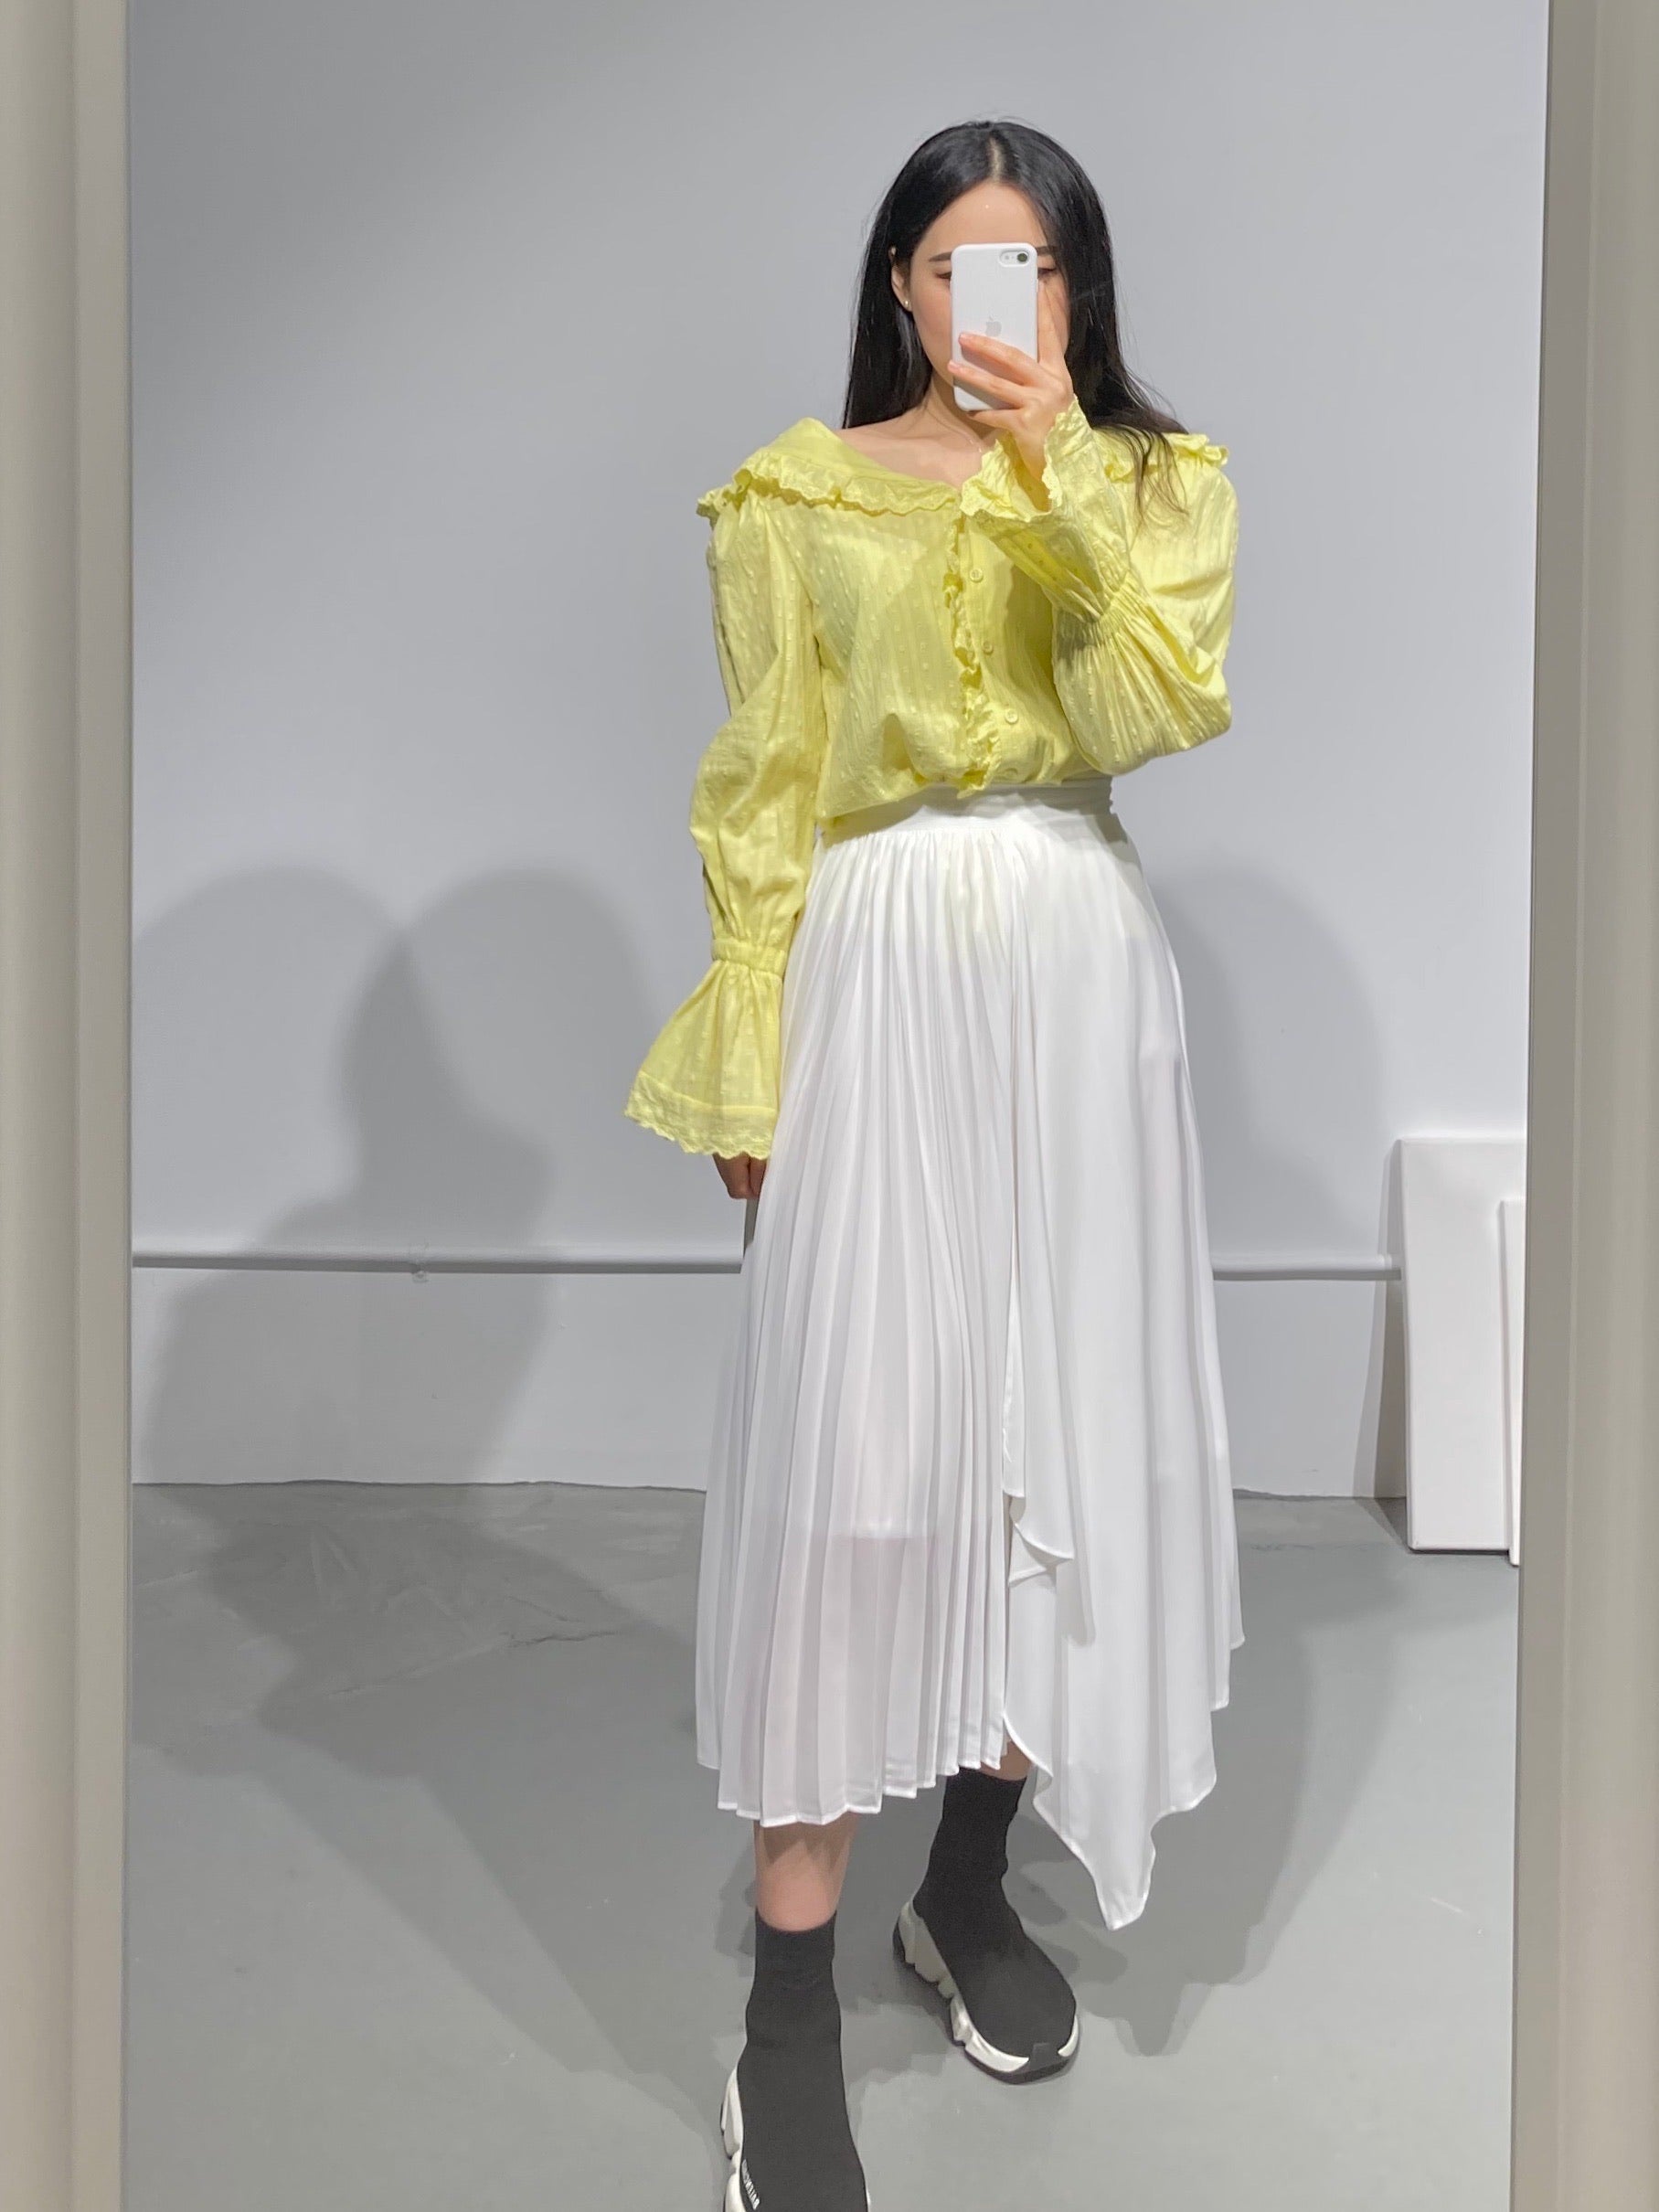 YURA Bell-sleeves Blouse in two colors